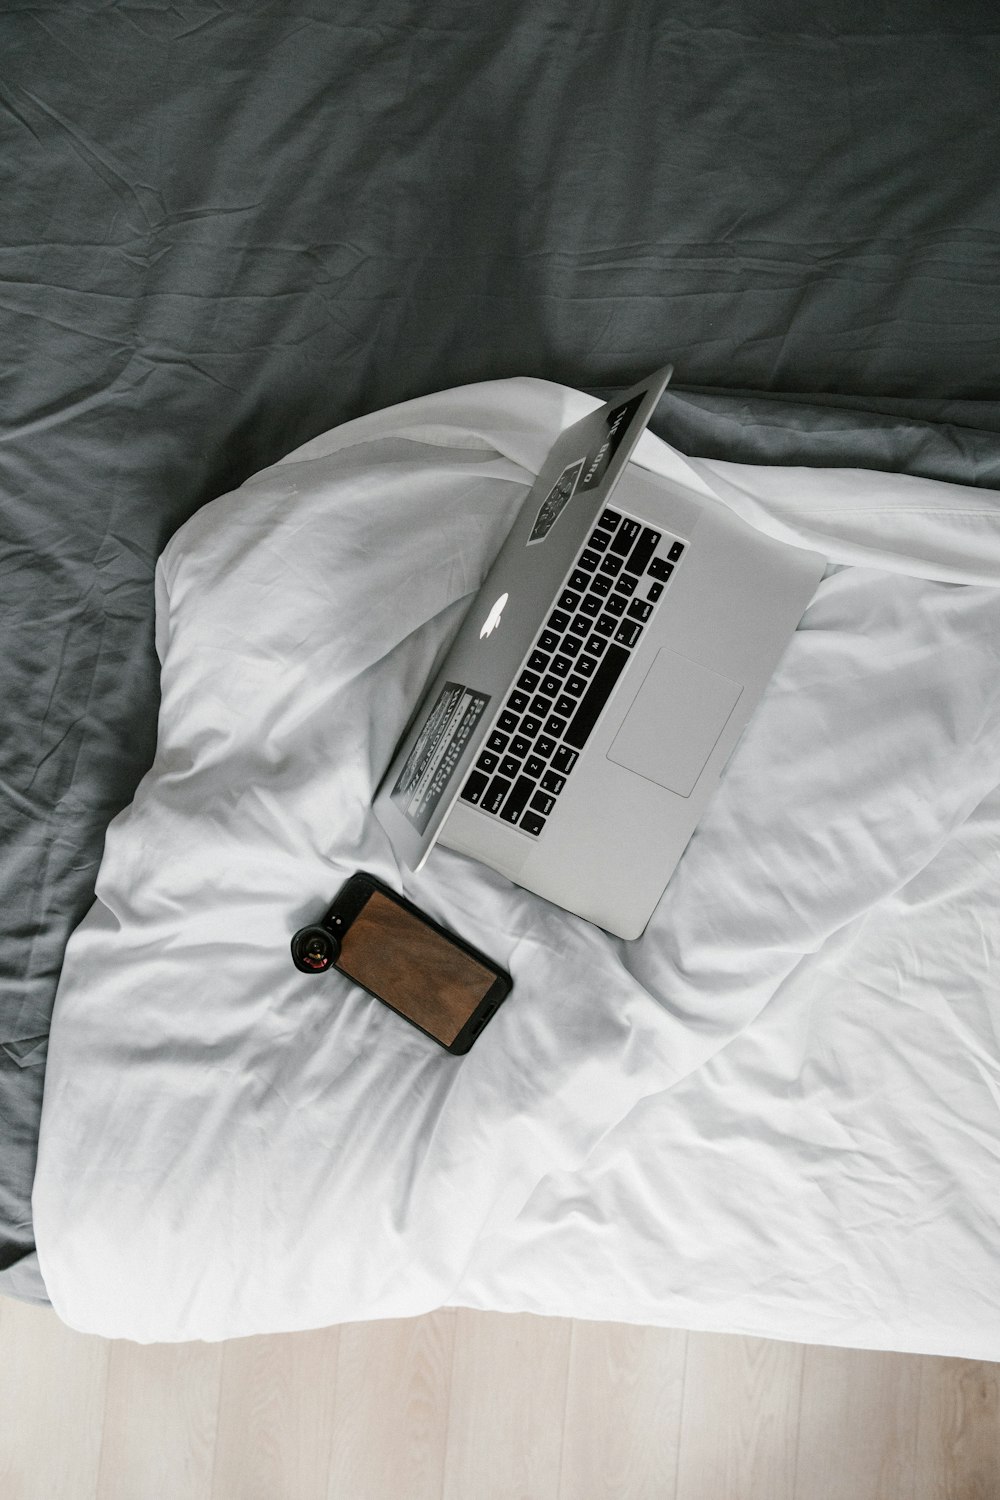 macbook pro beside brown leather wallet on white bed